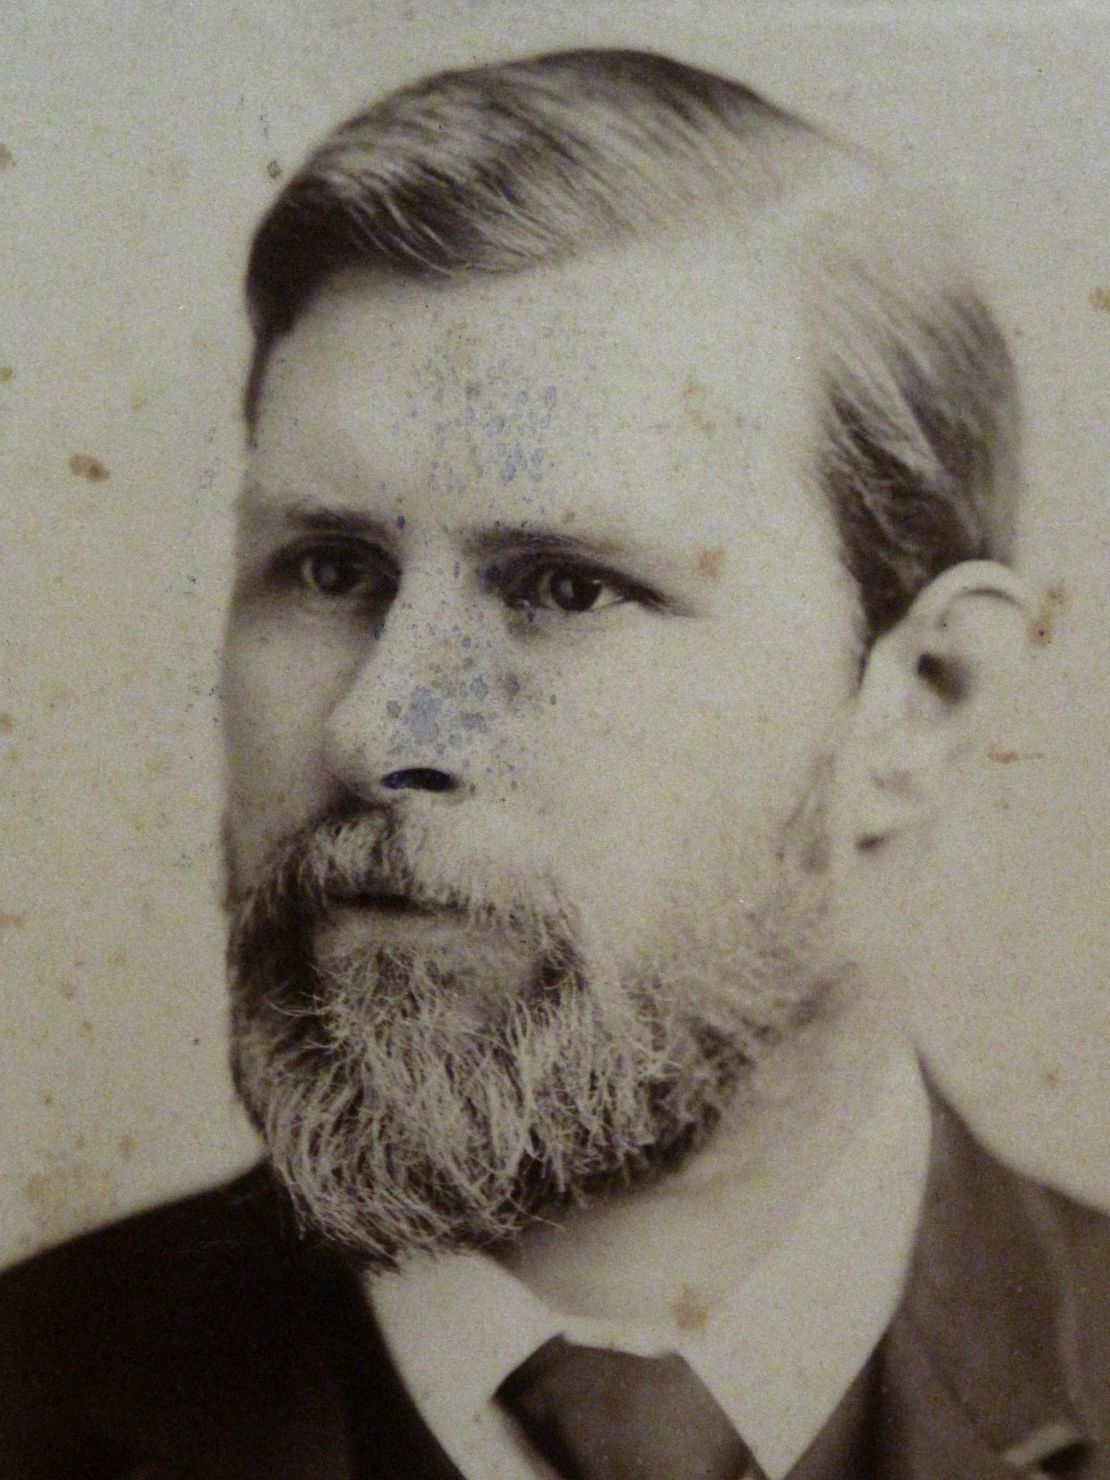 Bram Stoker around the time he was writing his journal.